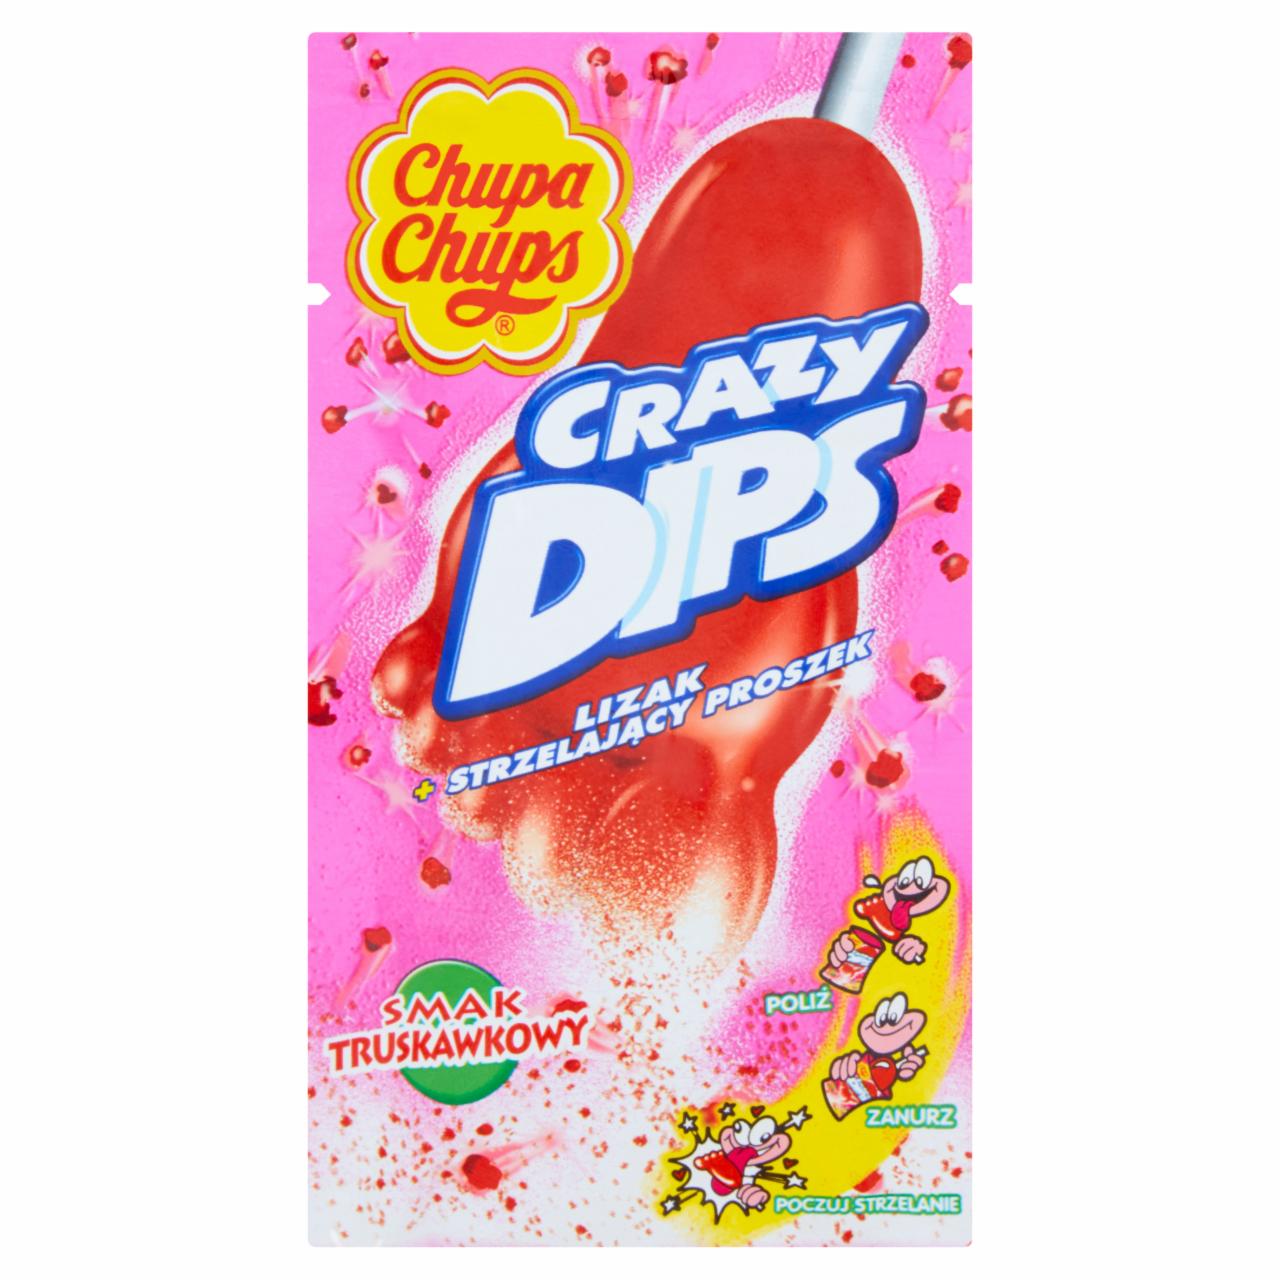 Photo - Chupa Chups Crazy Dips Strawberry Flavored Lollipop with Popping Powder 14 g